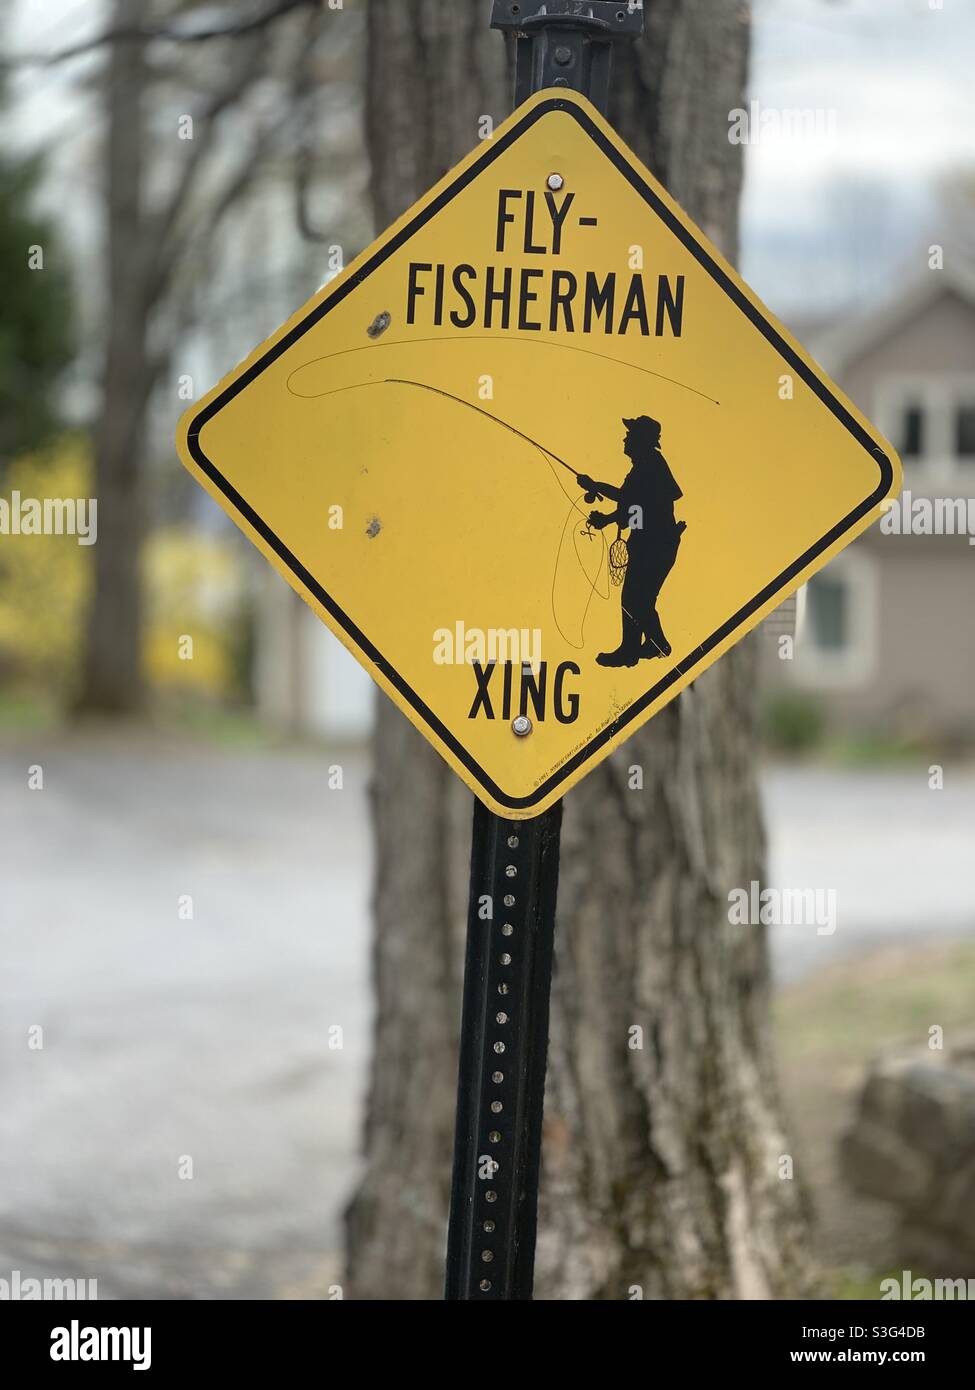 “Fly Fisherman XING” sign Stock Photo